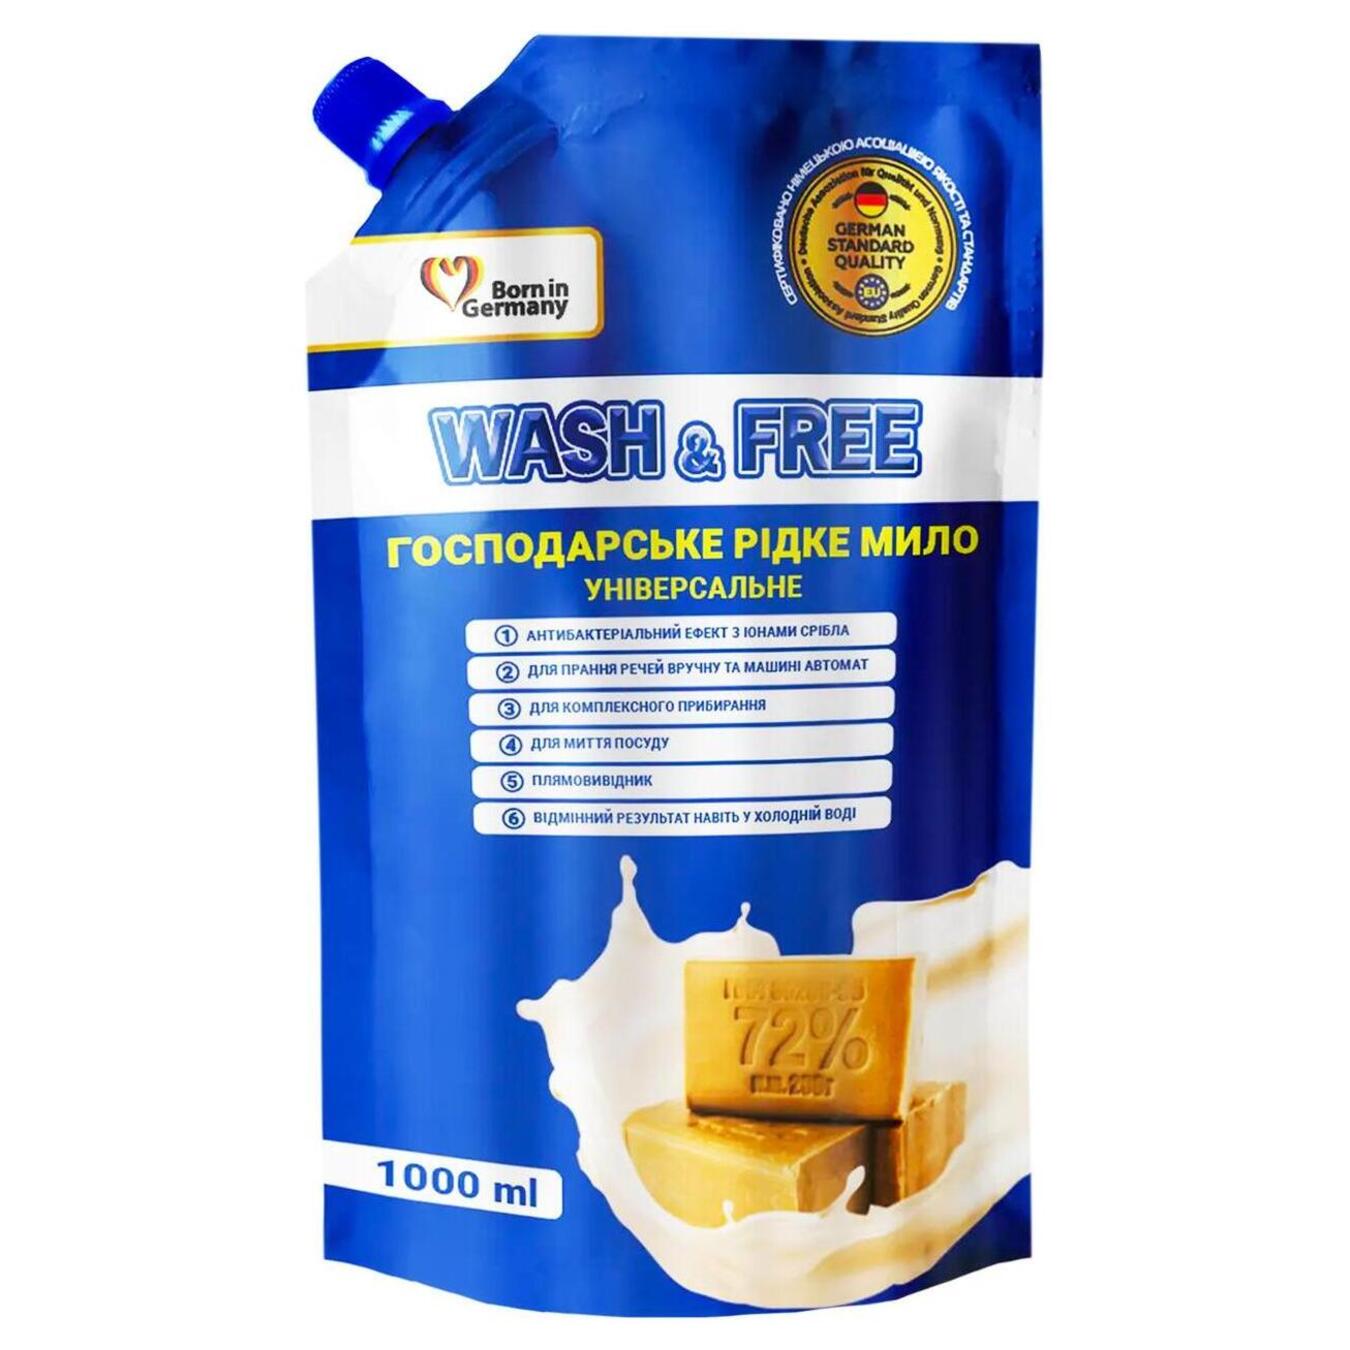 Wash&Free household liquid soap in a 1-liter pack